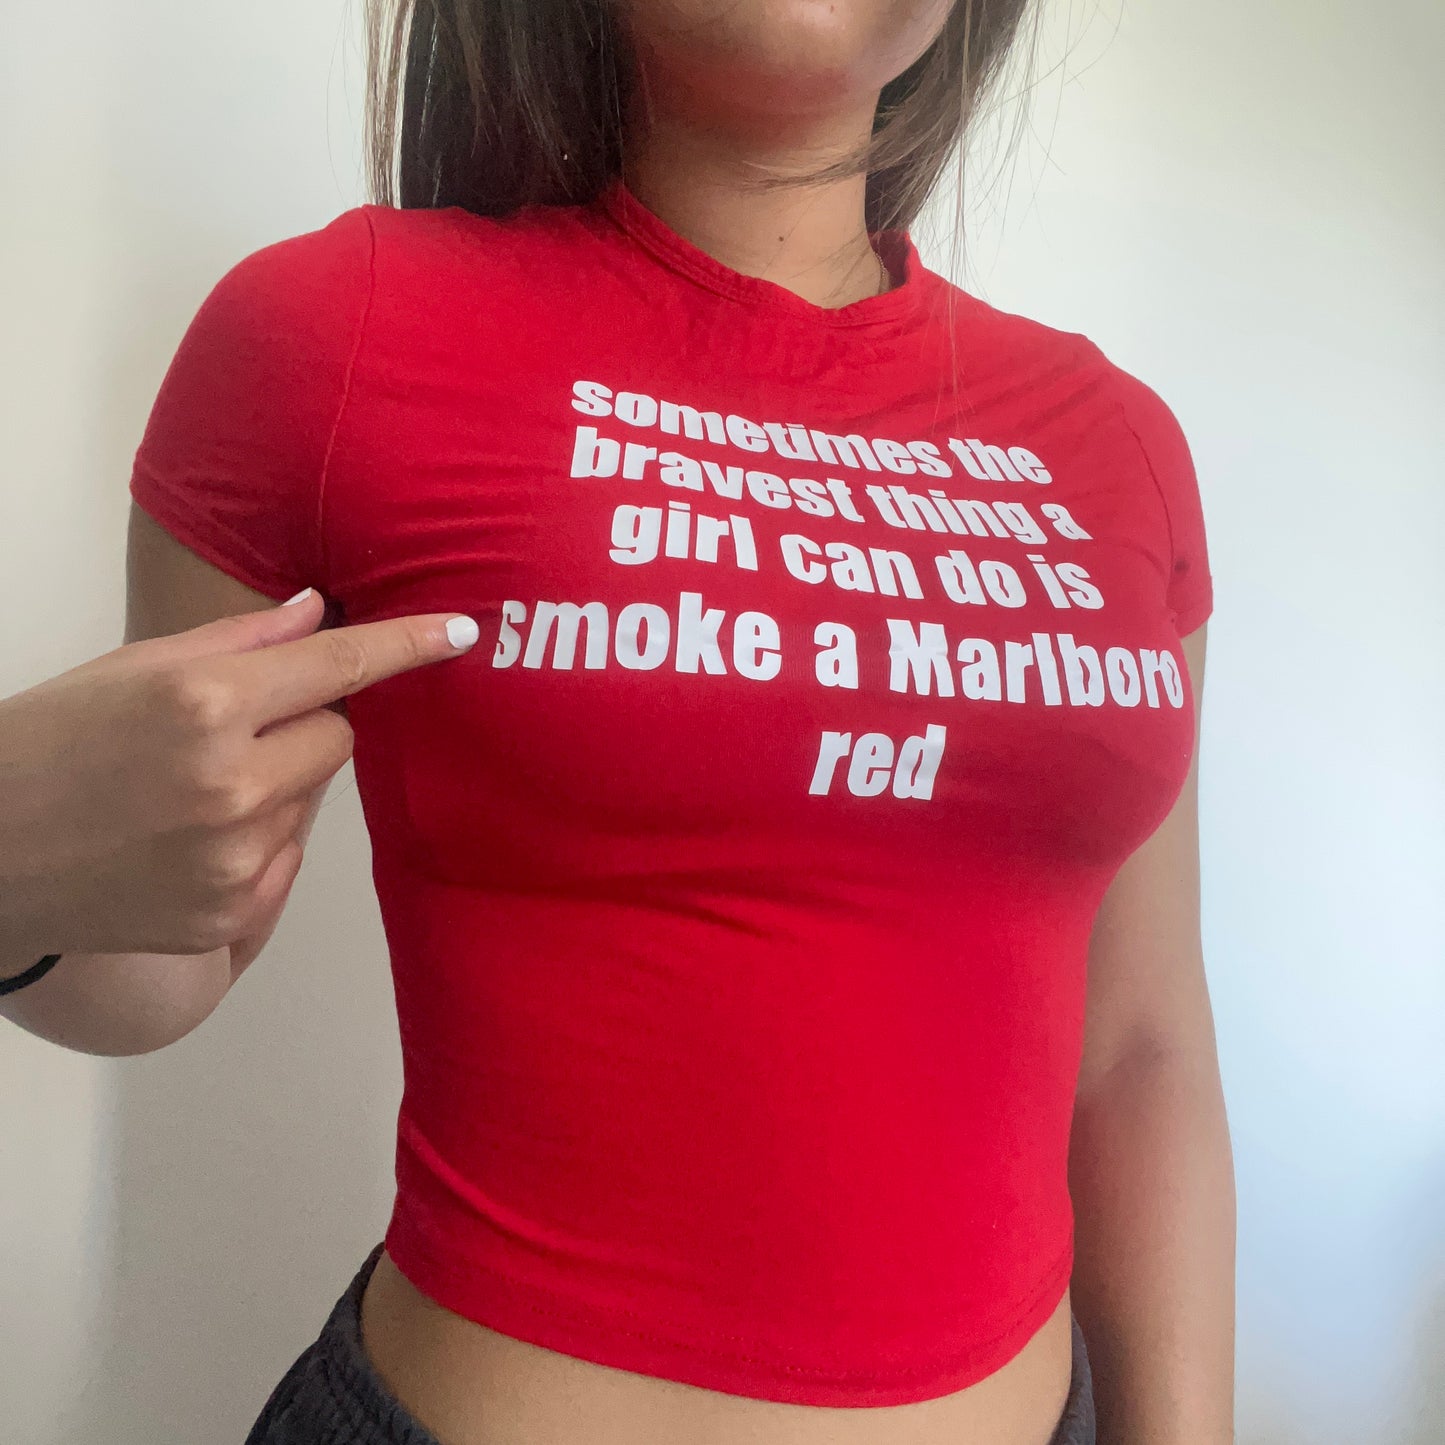 Sometimes The Bravest Thing A Girl Can Do Is Smoke A Marlboro Red